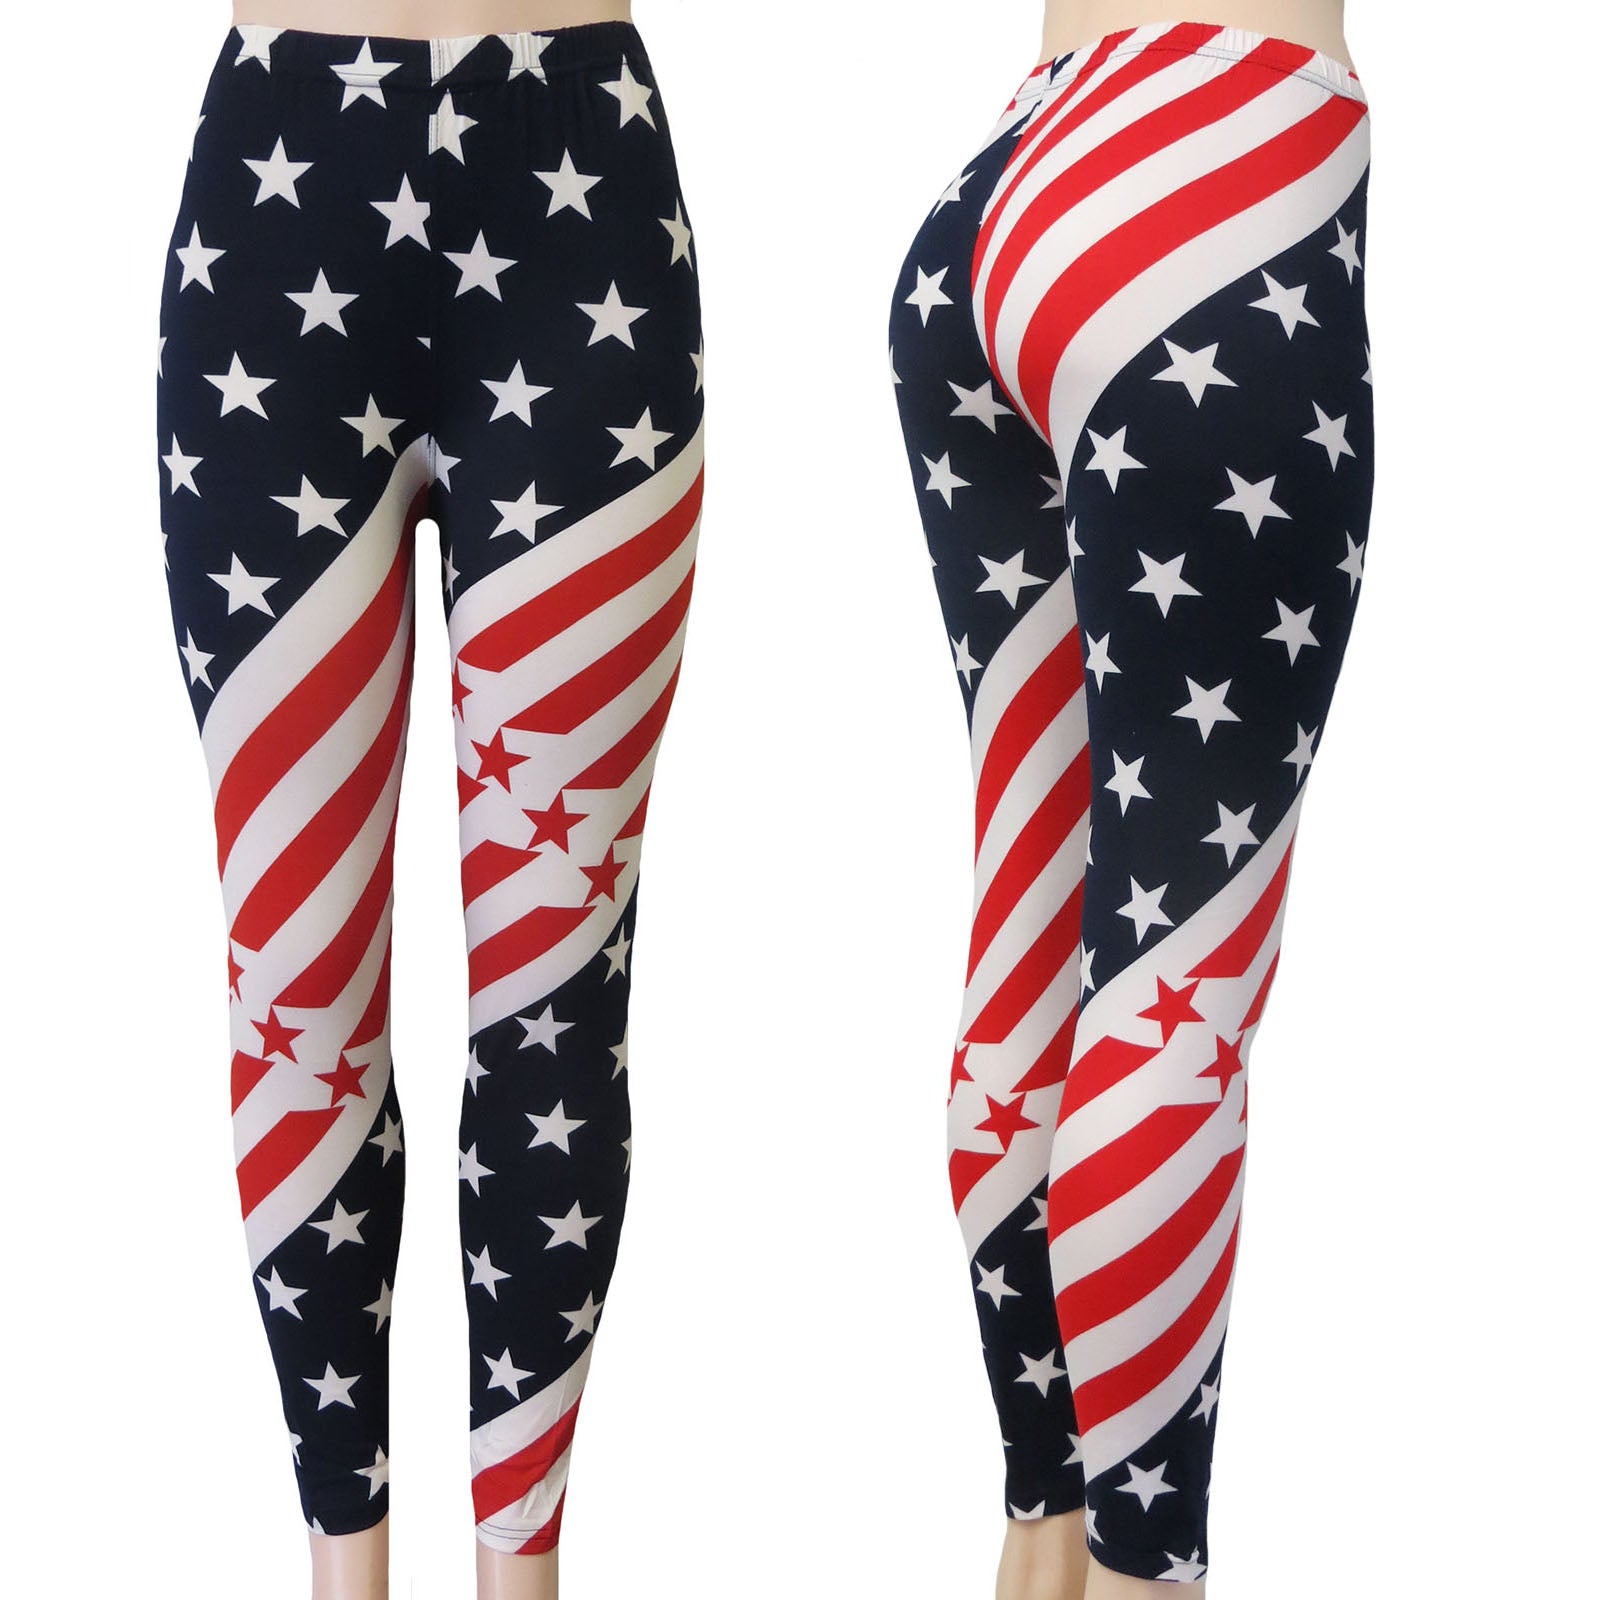 USA American Flag Wholesale Leggings in Red White and Blue Stars and Stripes